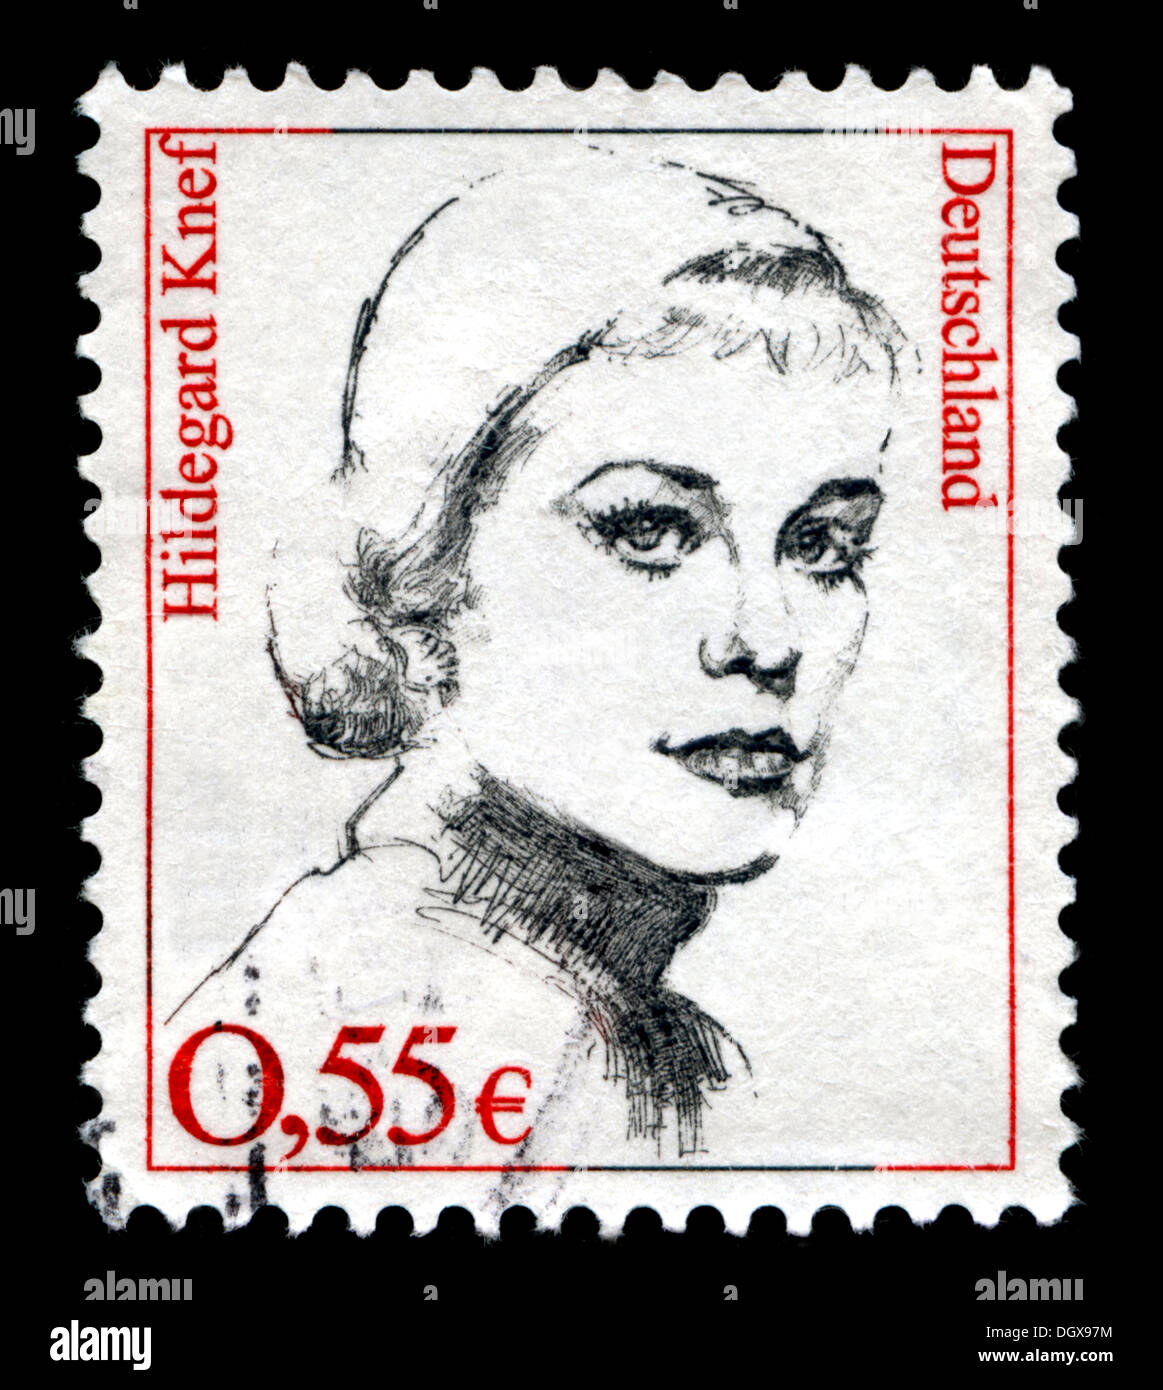 Germany postage stamp depicting Hildegard Knef, a German actress, singer, and writer Stock Photo